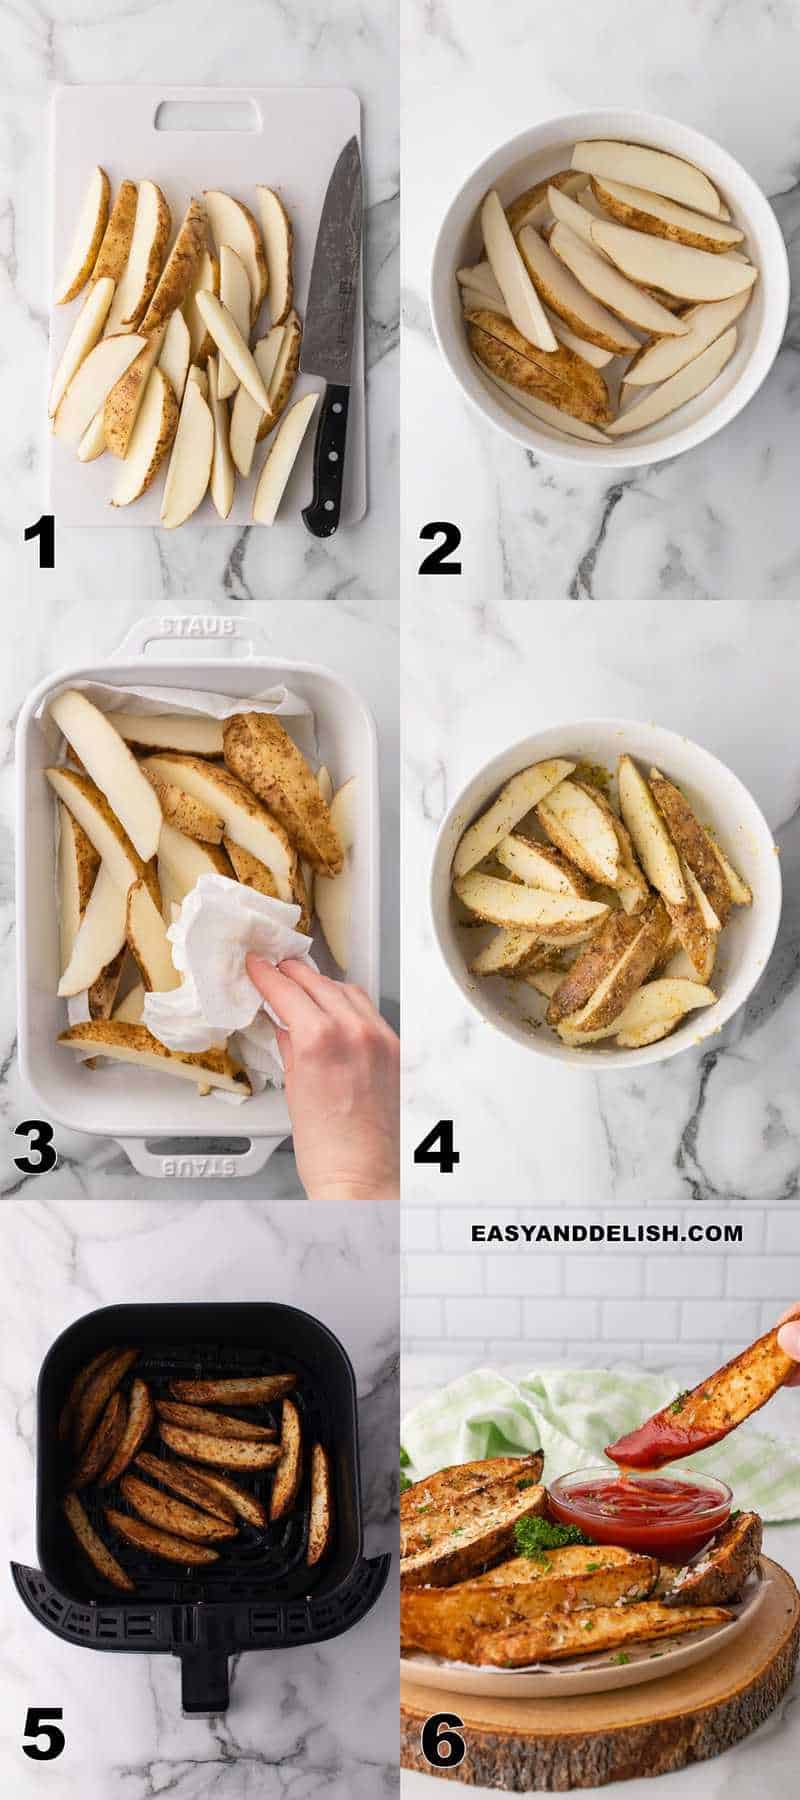 EASY POTATO WEDGES 😱😱😱😱😱 WITH @paris.rhone AIR FRYER OVEN